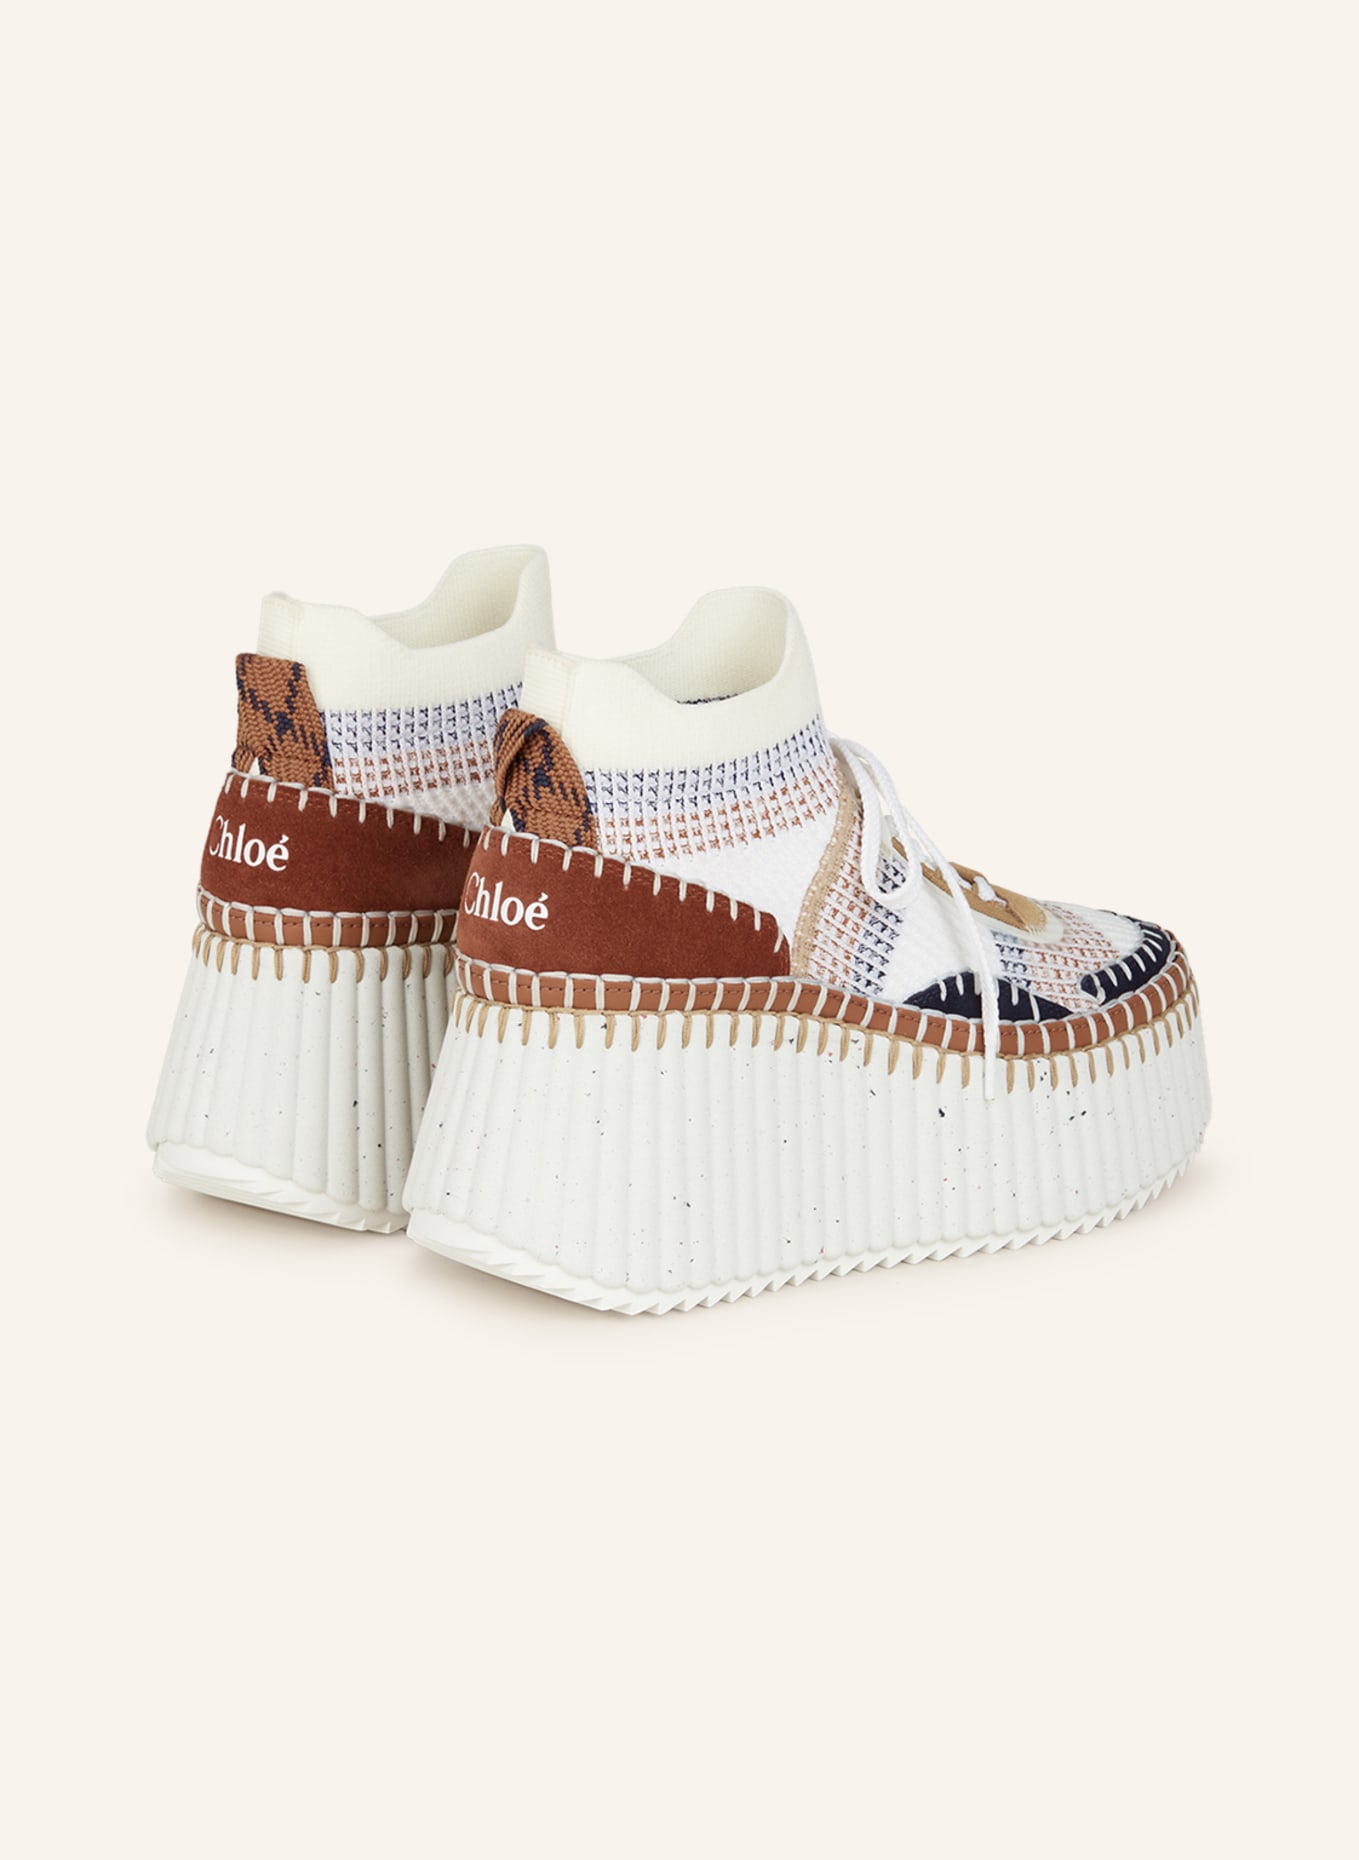 Chloé Hightop sneakers NAMA, Color: BROWN/ WHITE/ BLUE (Image 2)